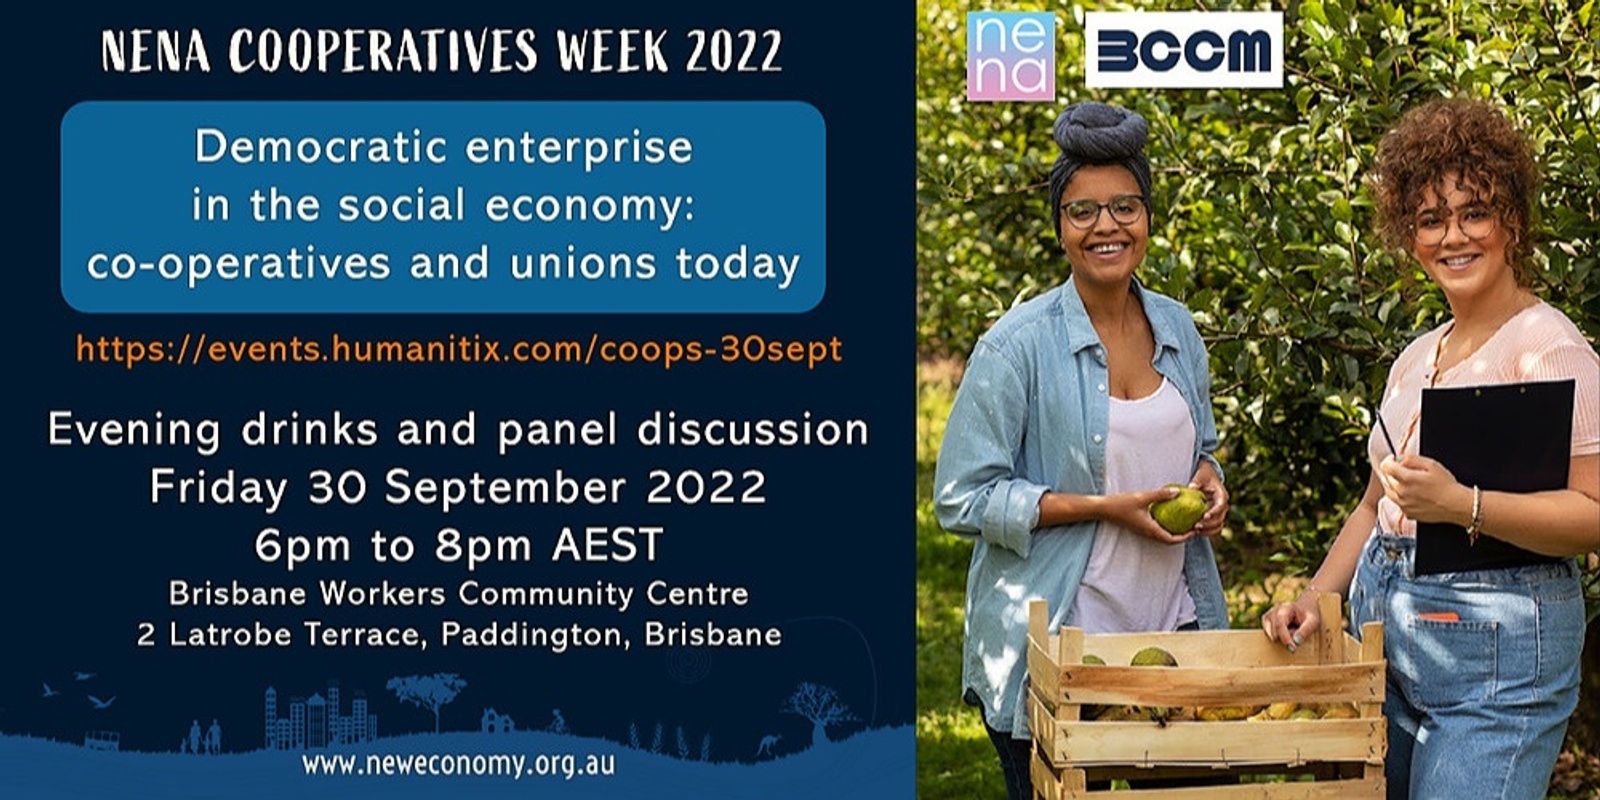 Democratic enterprise in the social economy: co-operatives and unions today